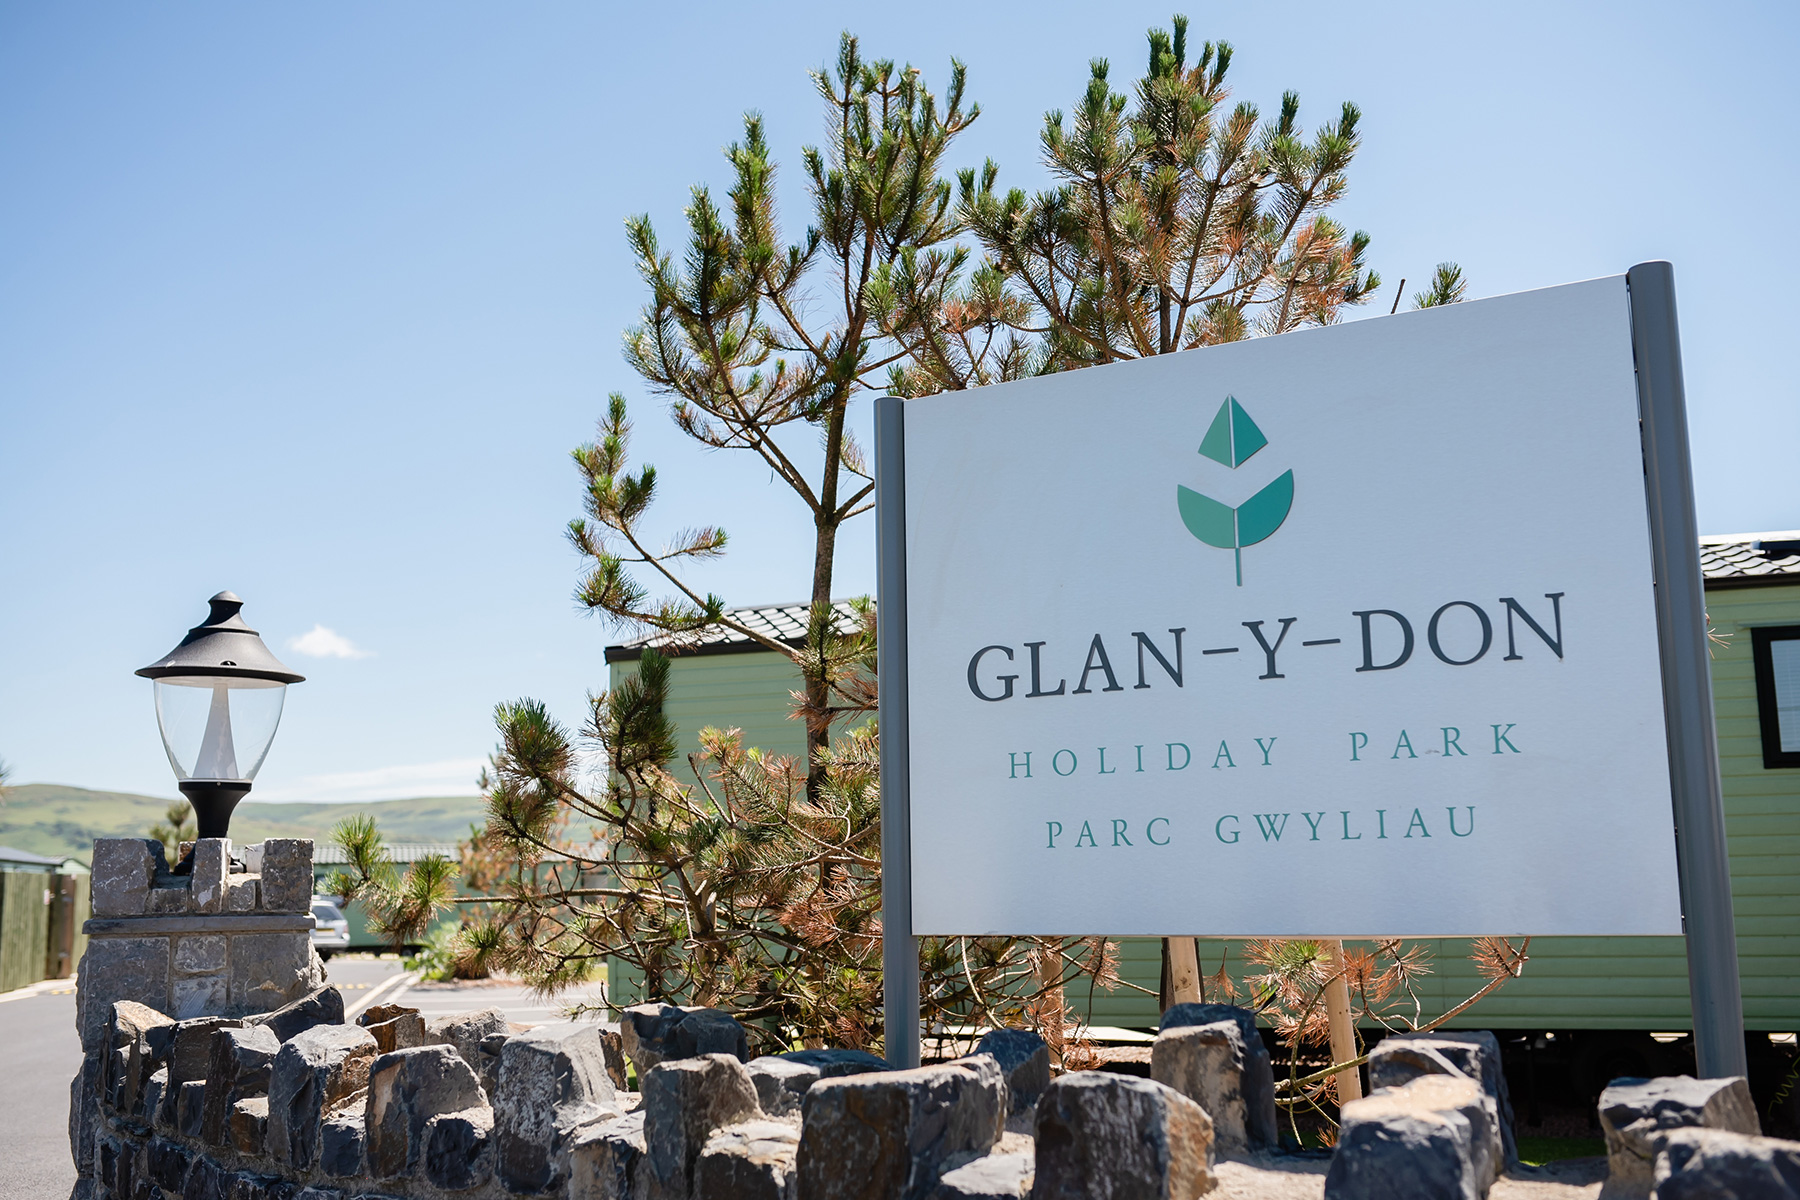 Glan-y-don Holiday Park Wales